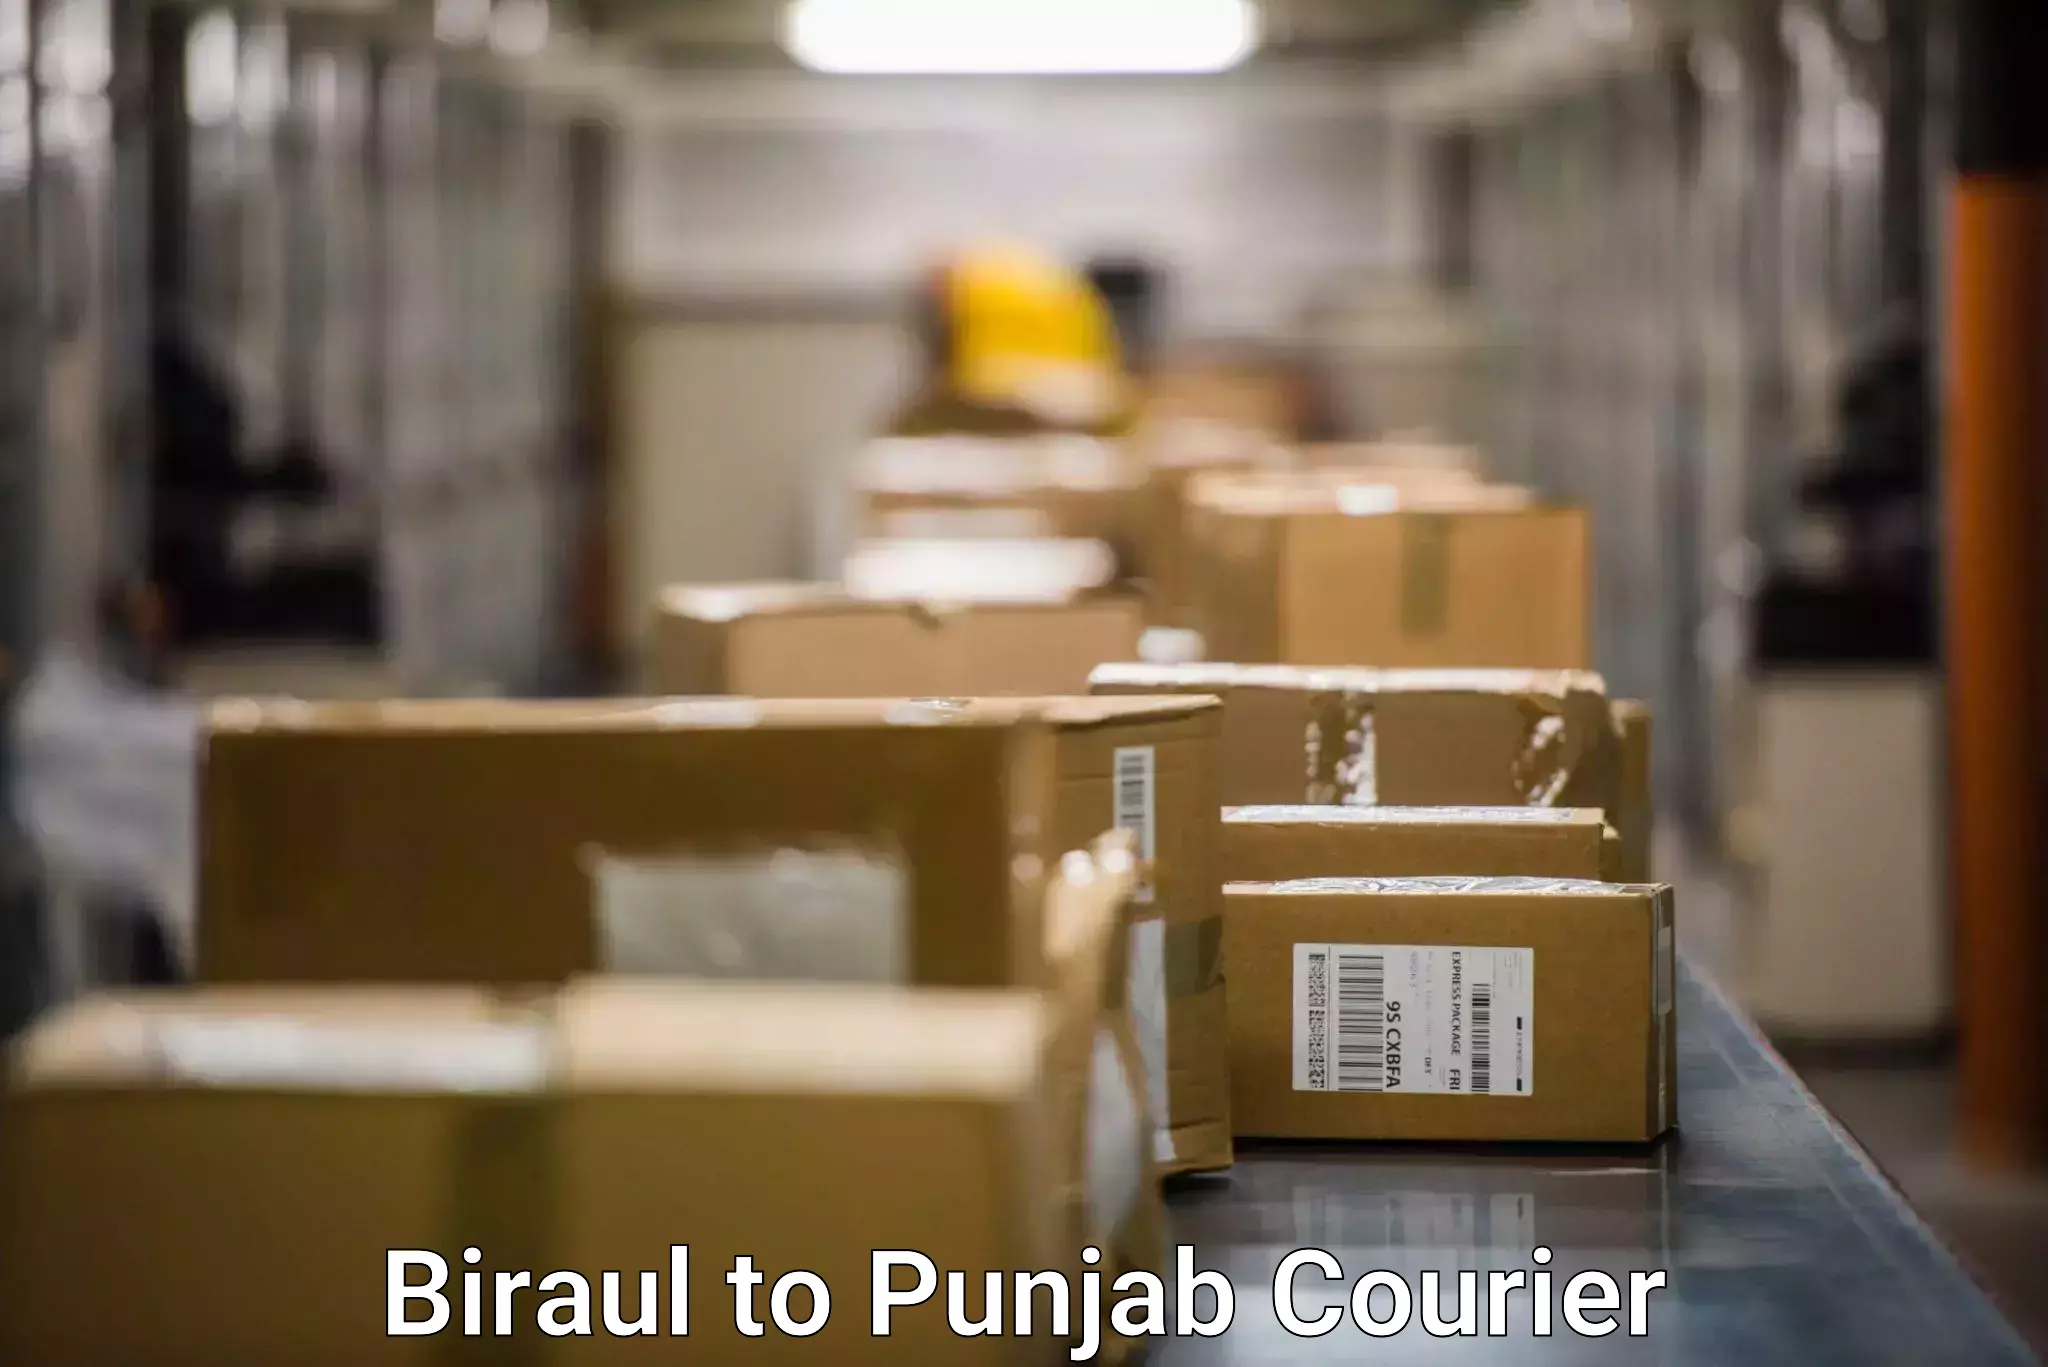 Nationwide courier service Biraul to Punjab